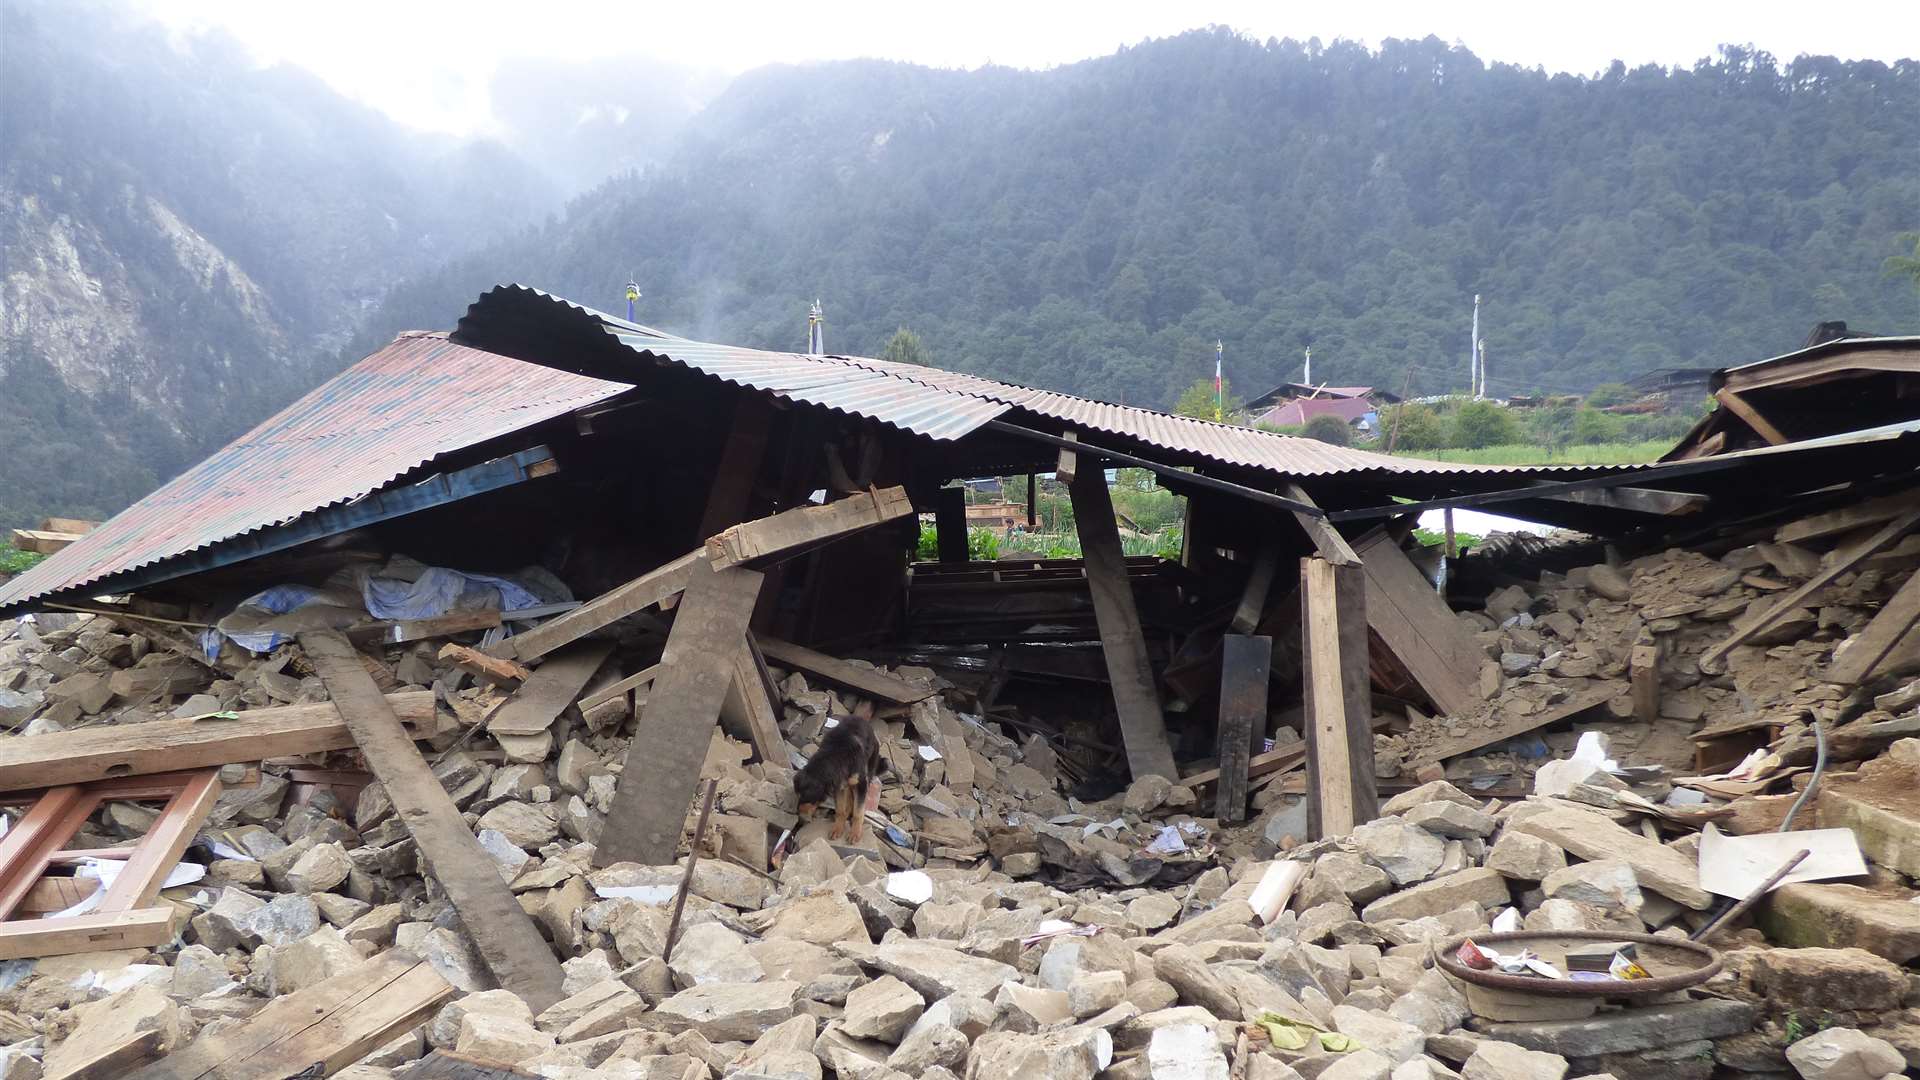 Some of the destruction in Melamchi Ghyang. Image from Corin Hardcastle